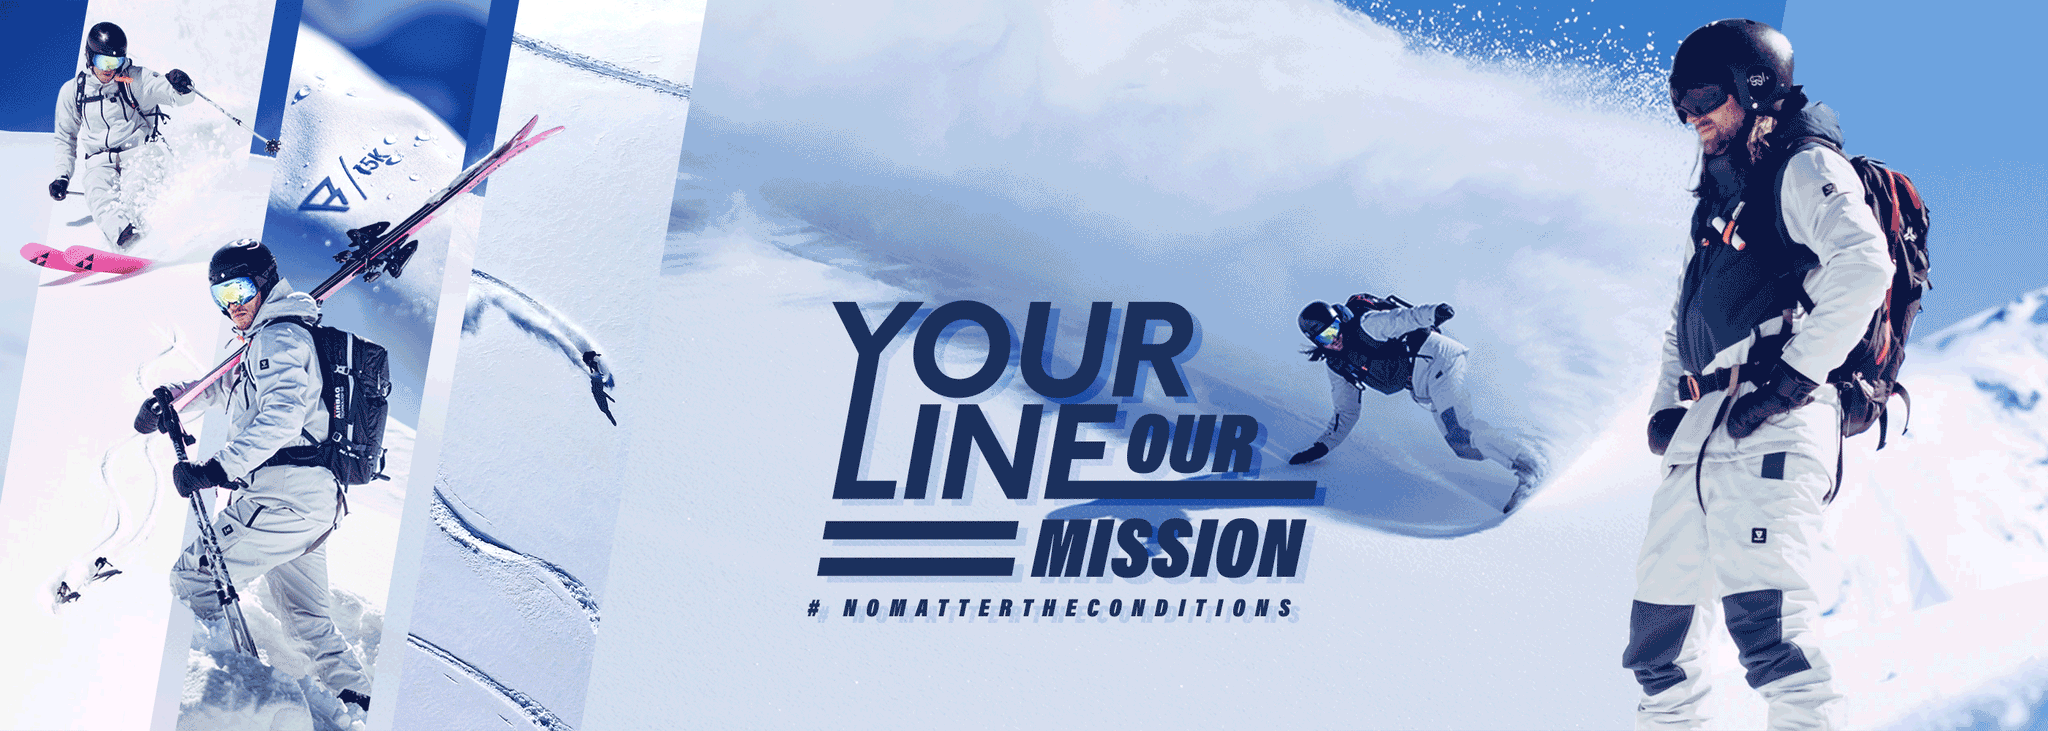 Brunotti Men's Winter Sports Collection | Your Line - Our Mission